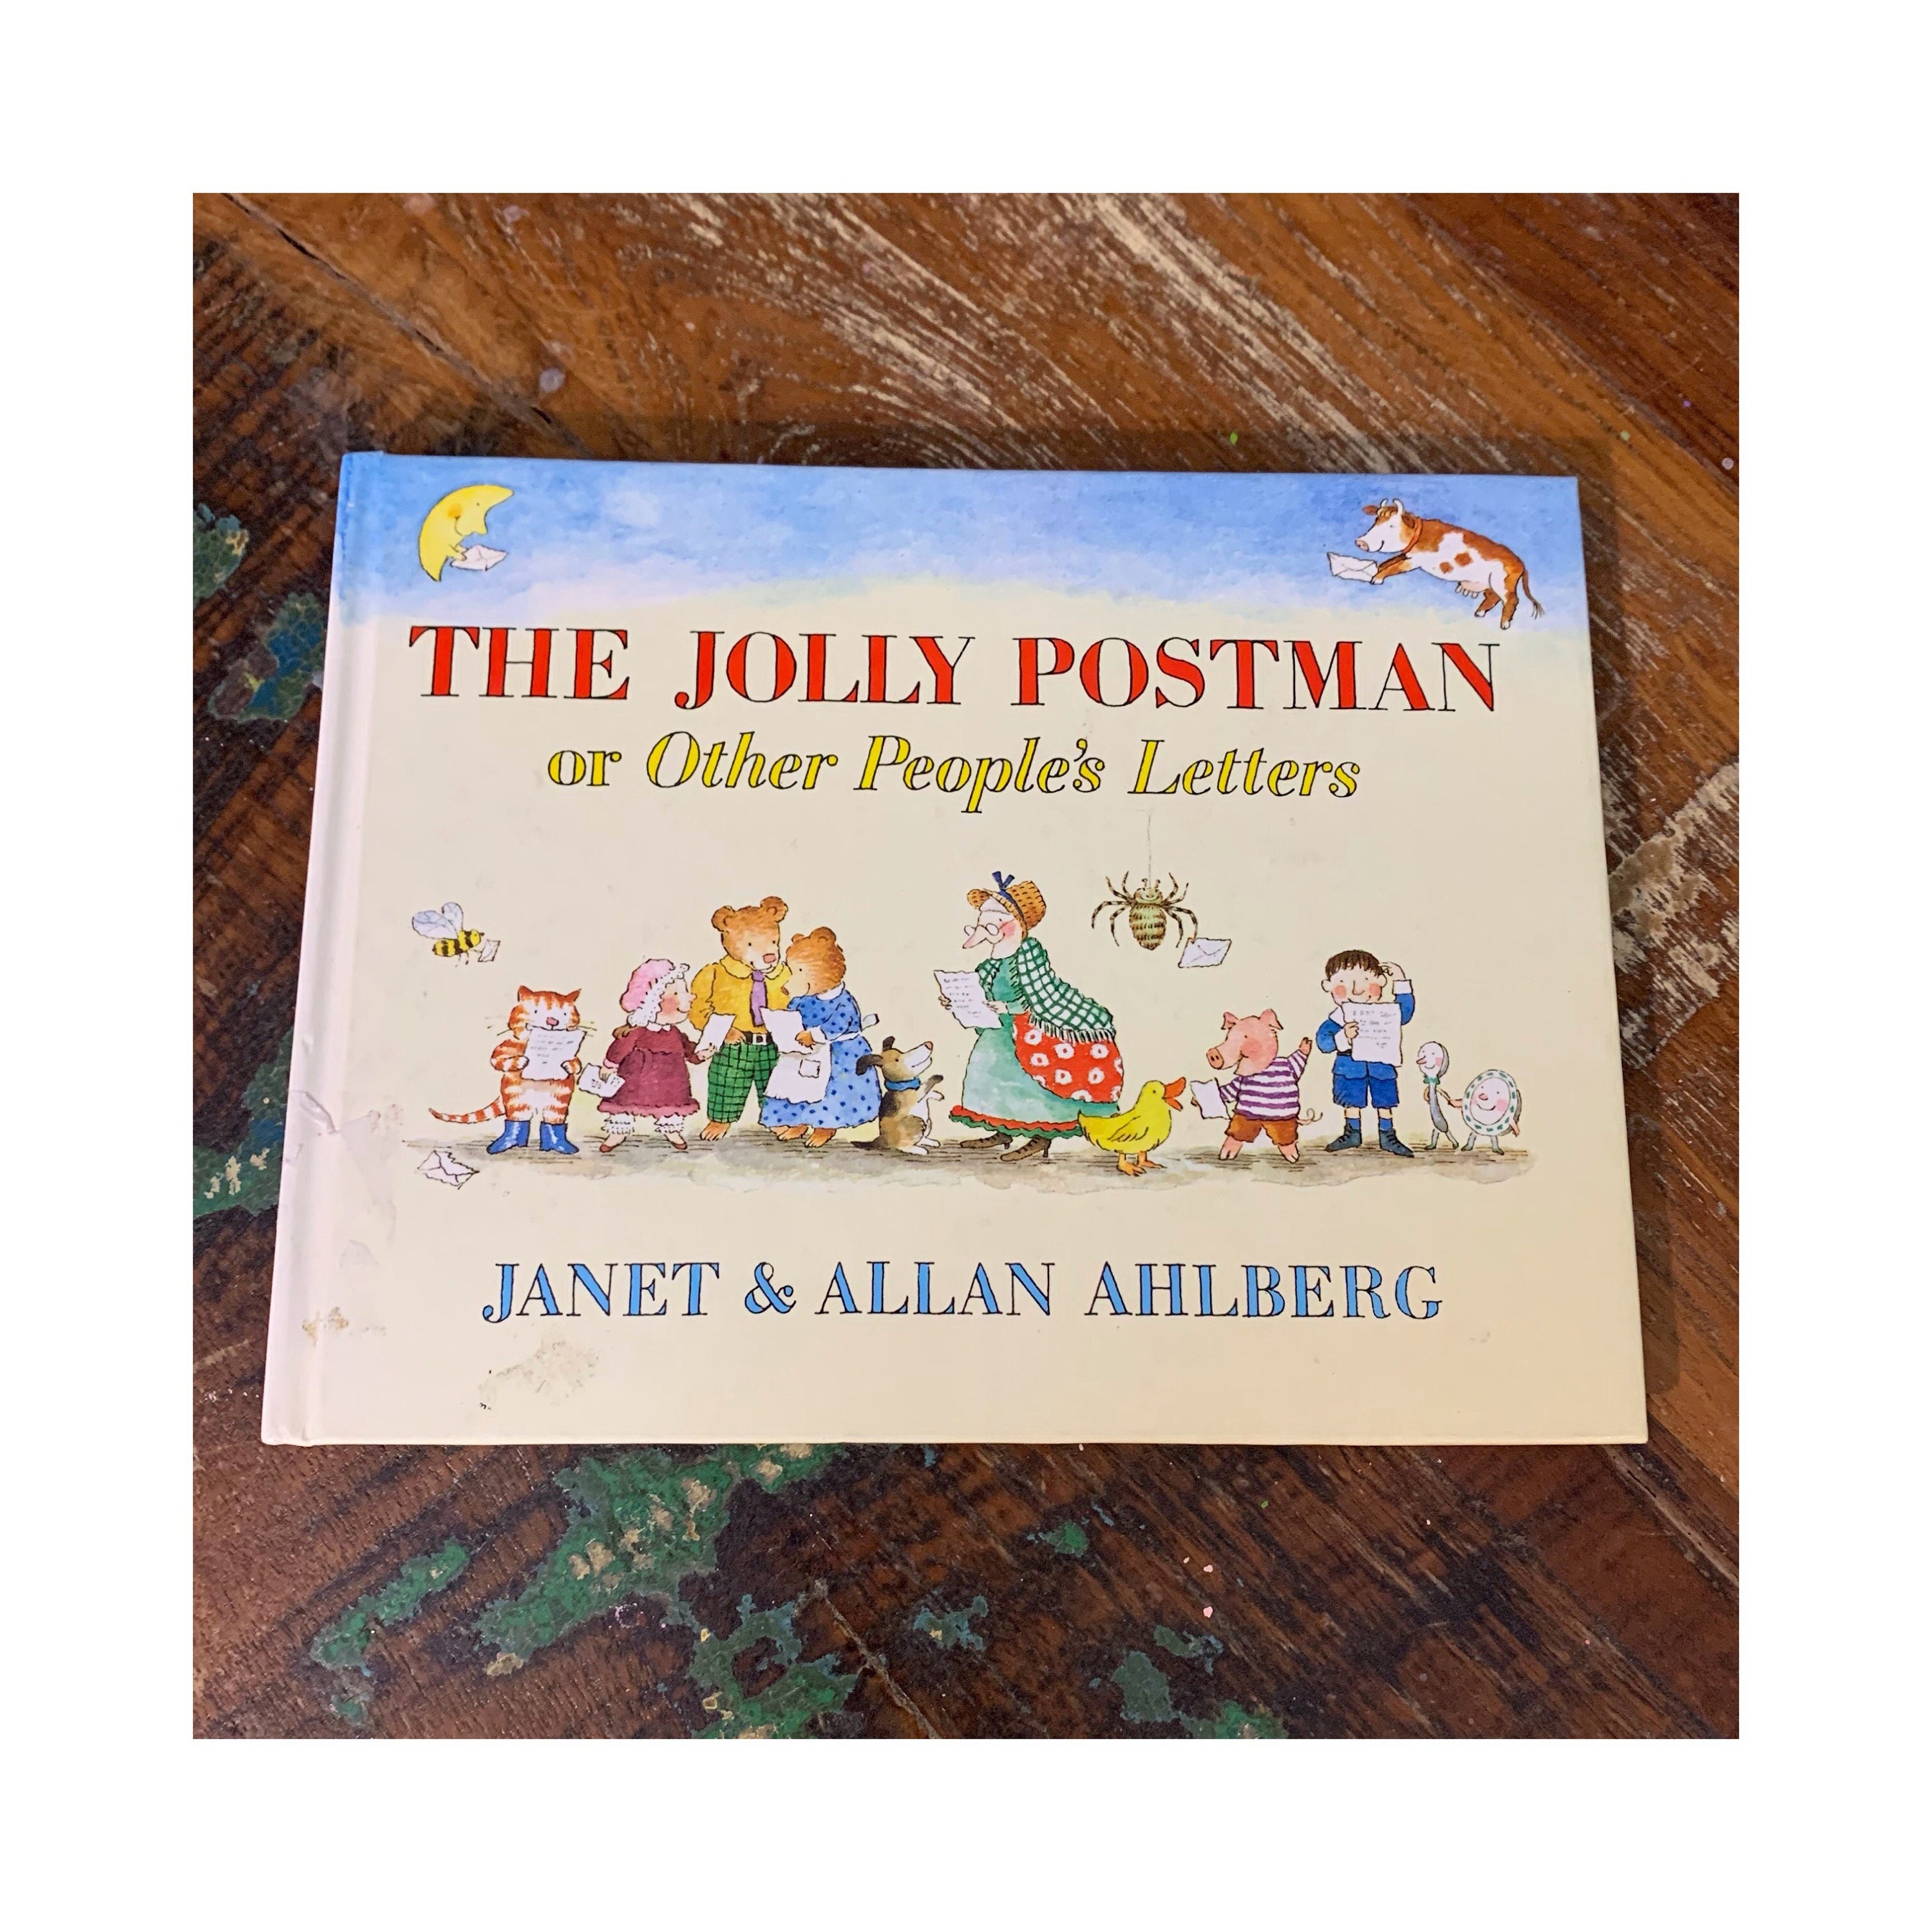 The　Letters　Jolly　Allan　Others　Postman　or　Etsy　Peoples　Janet